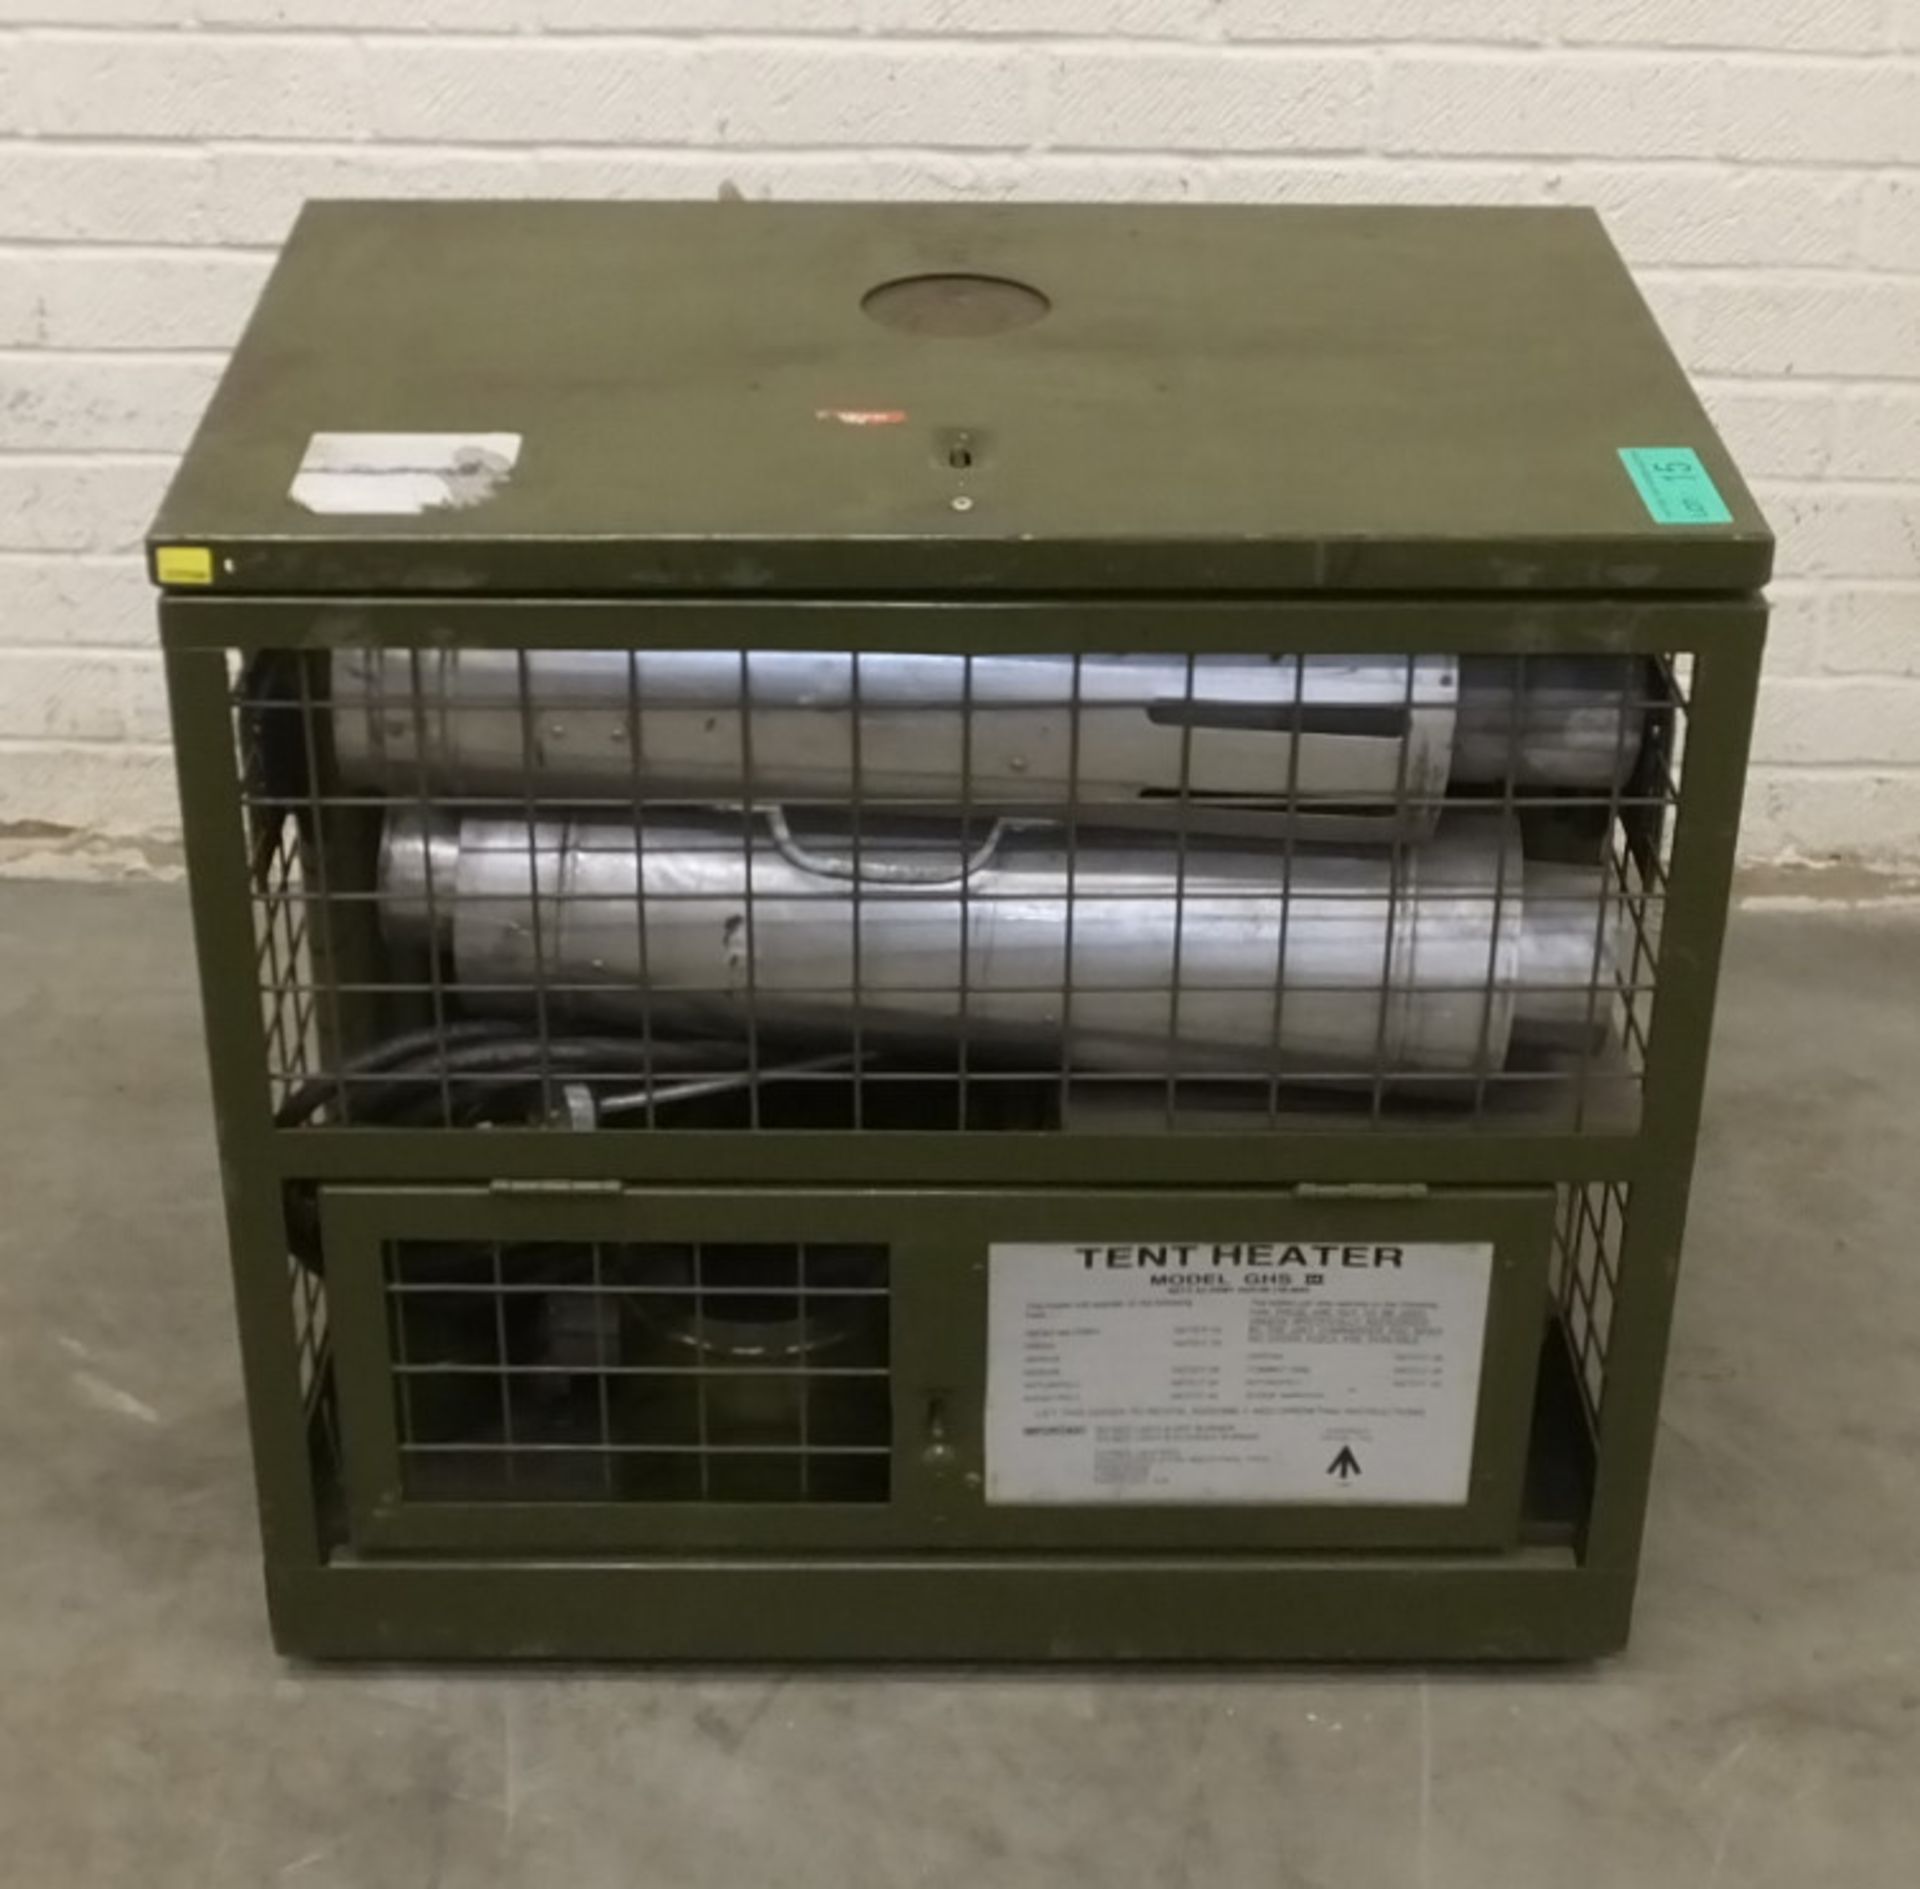 HotBox Heaters Tent Heater GHS III - NSN 4520-99-130-6045 Output - 5-15kW, Ex-MOD specific - Image 8 of 10